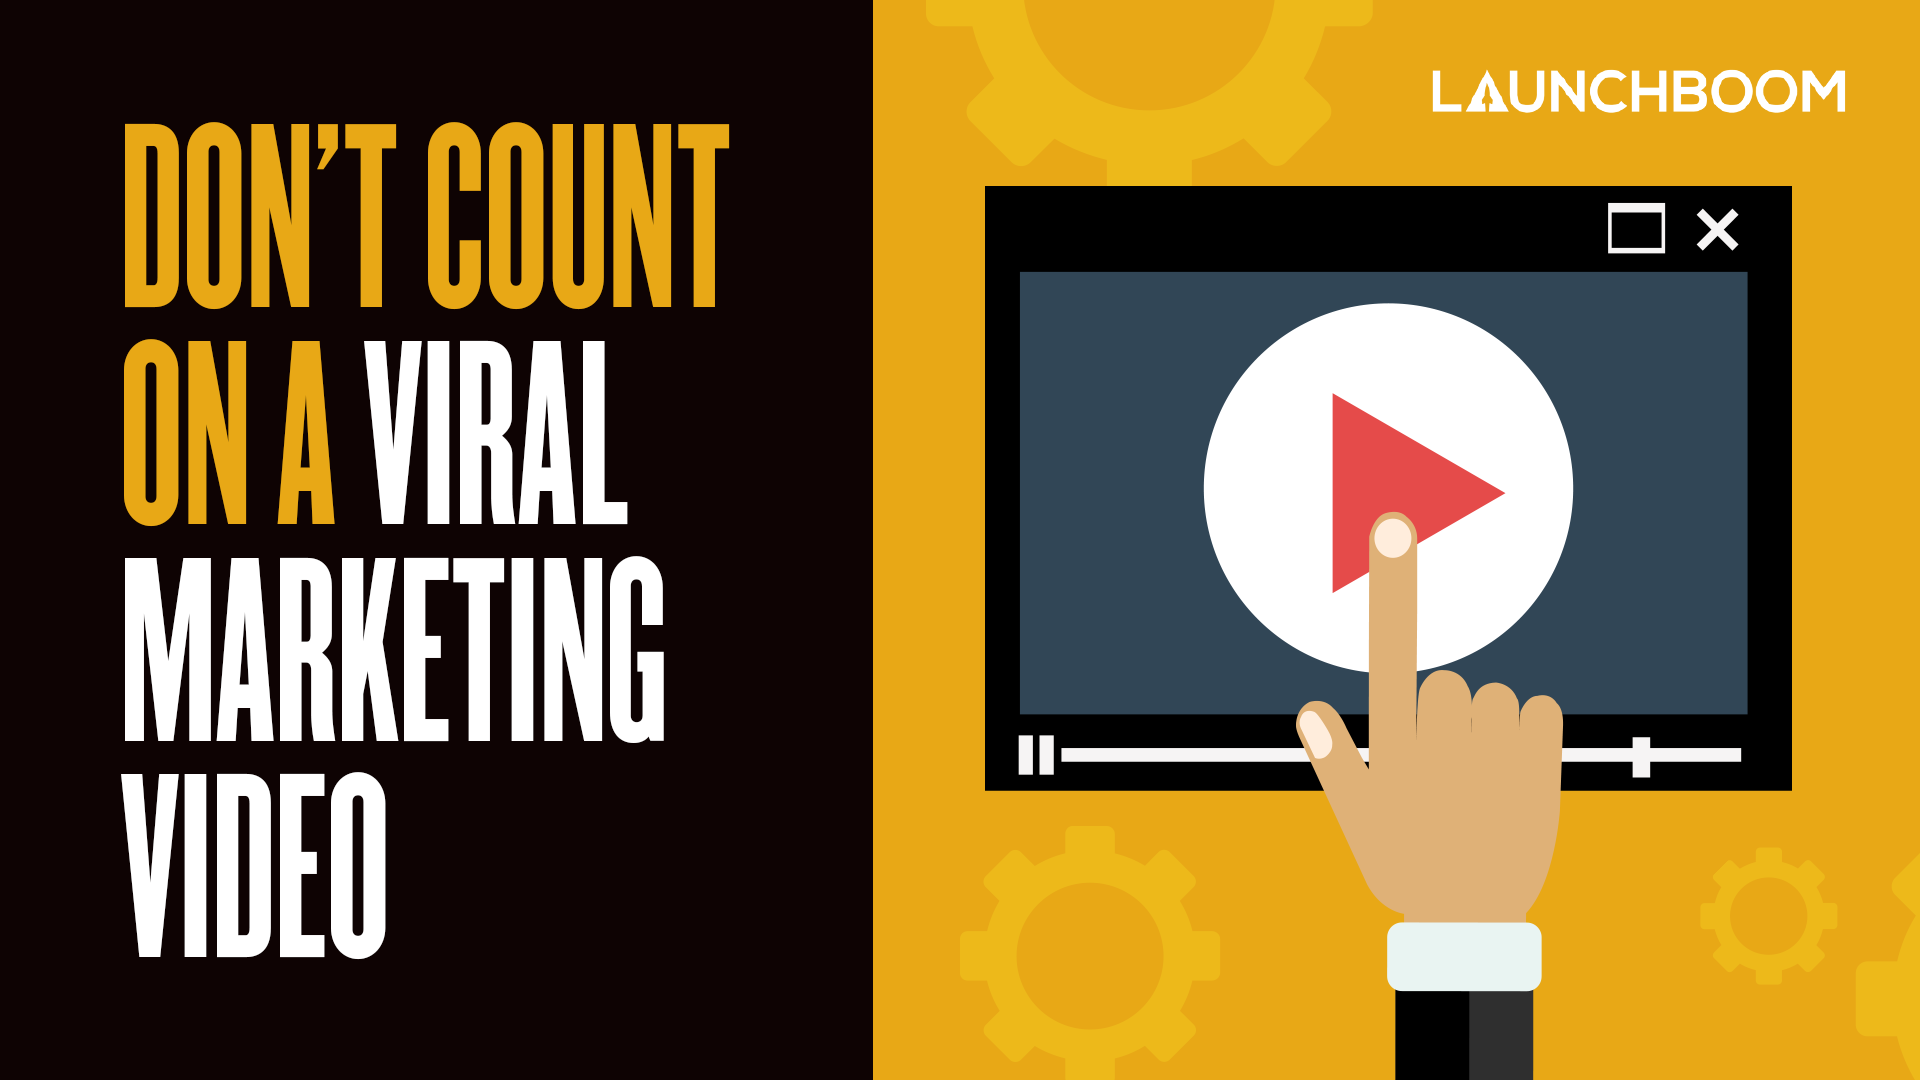 Don’t count on a viral marketing video